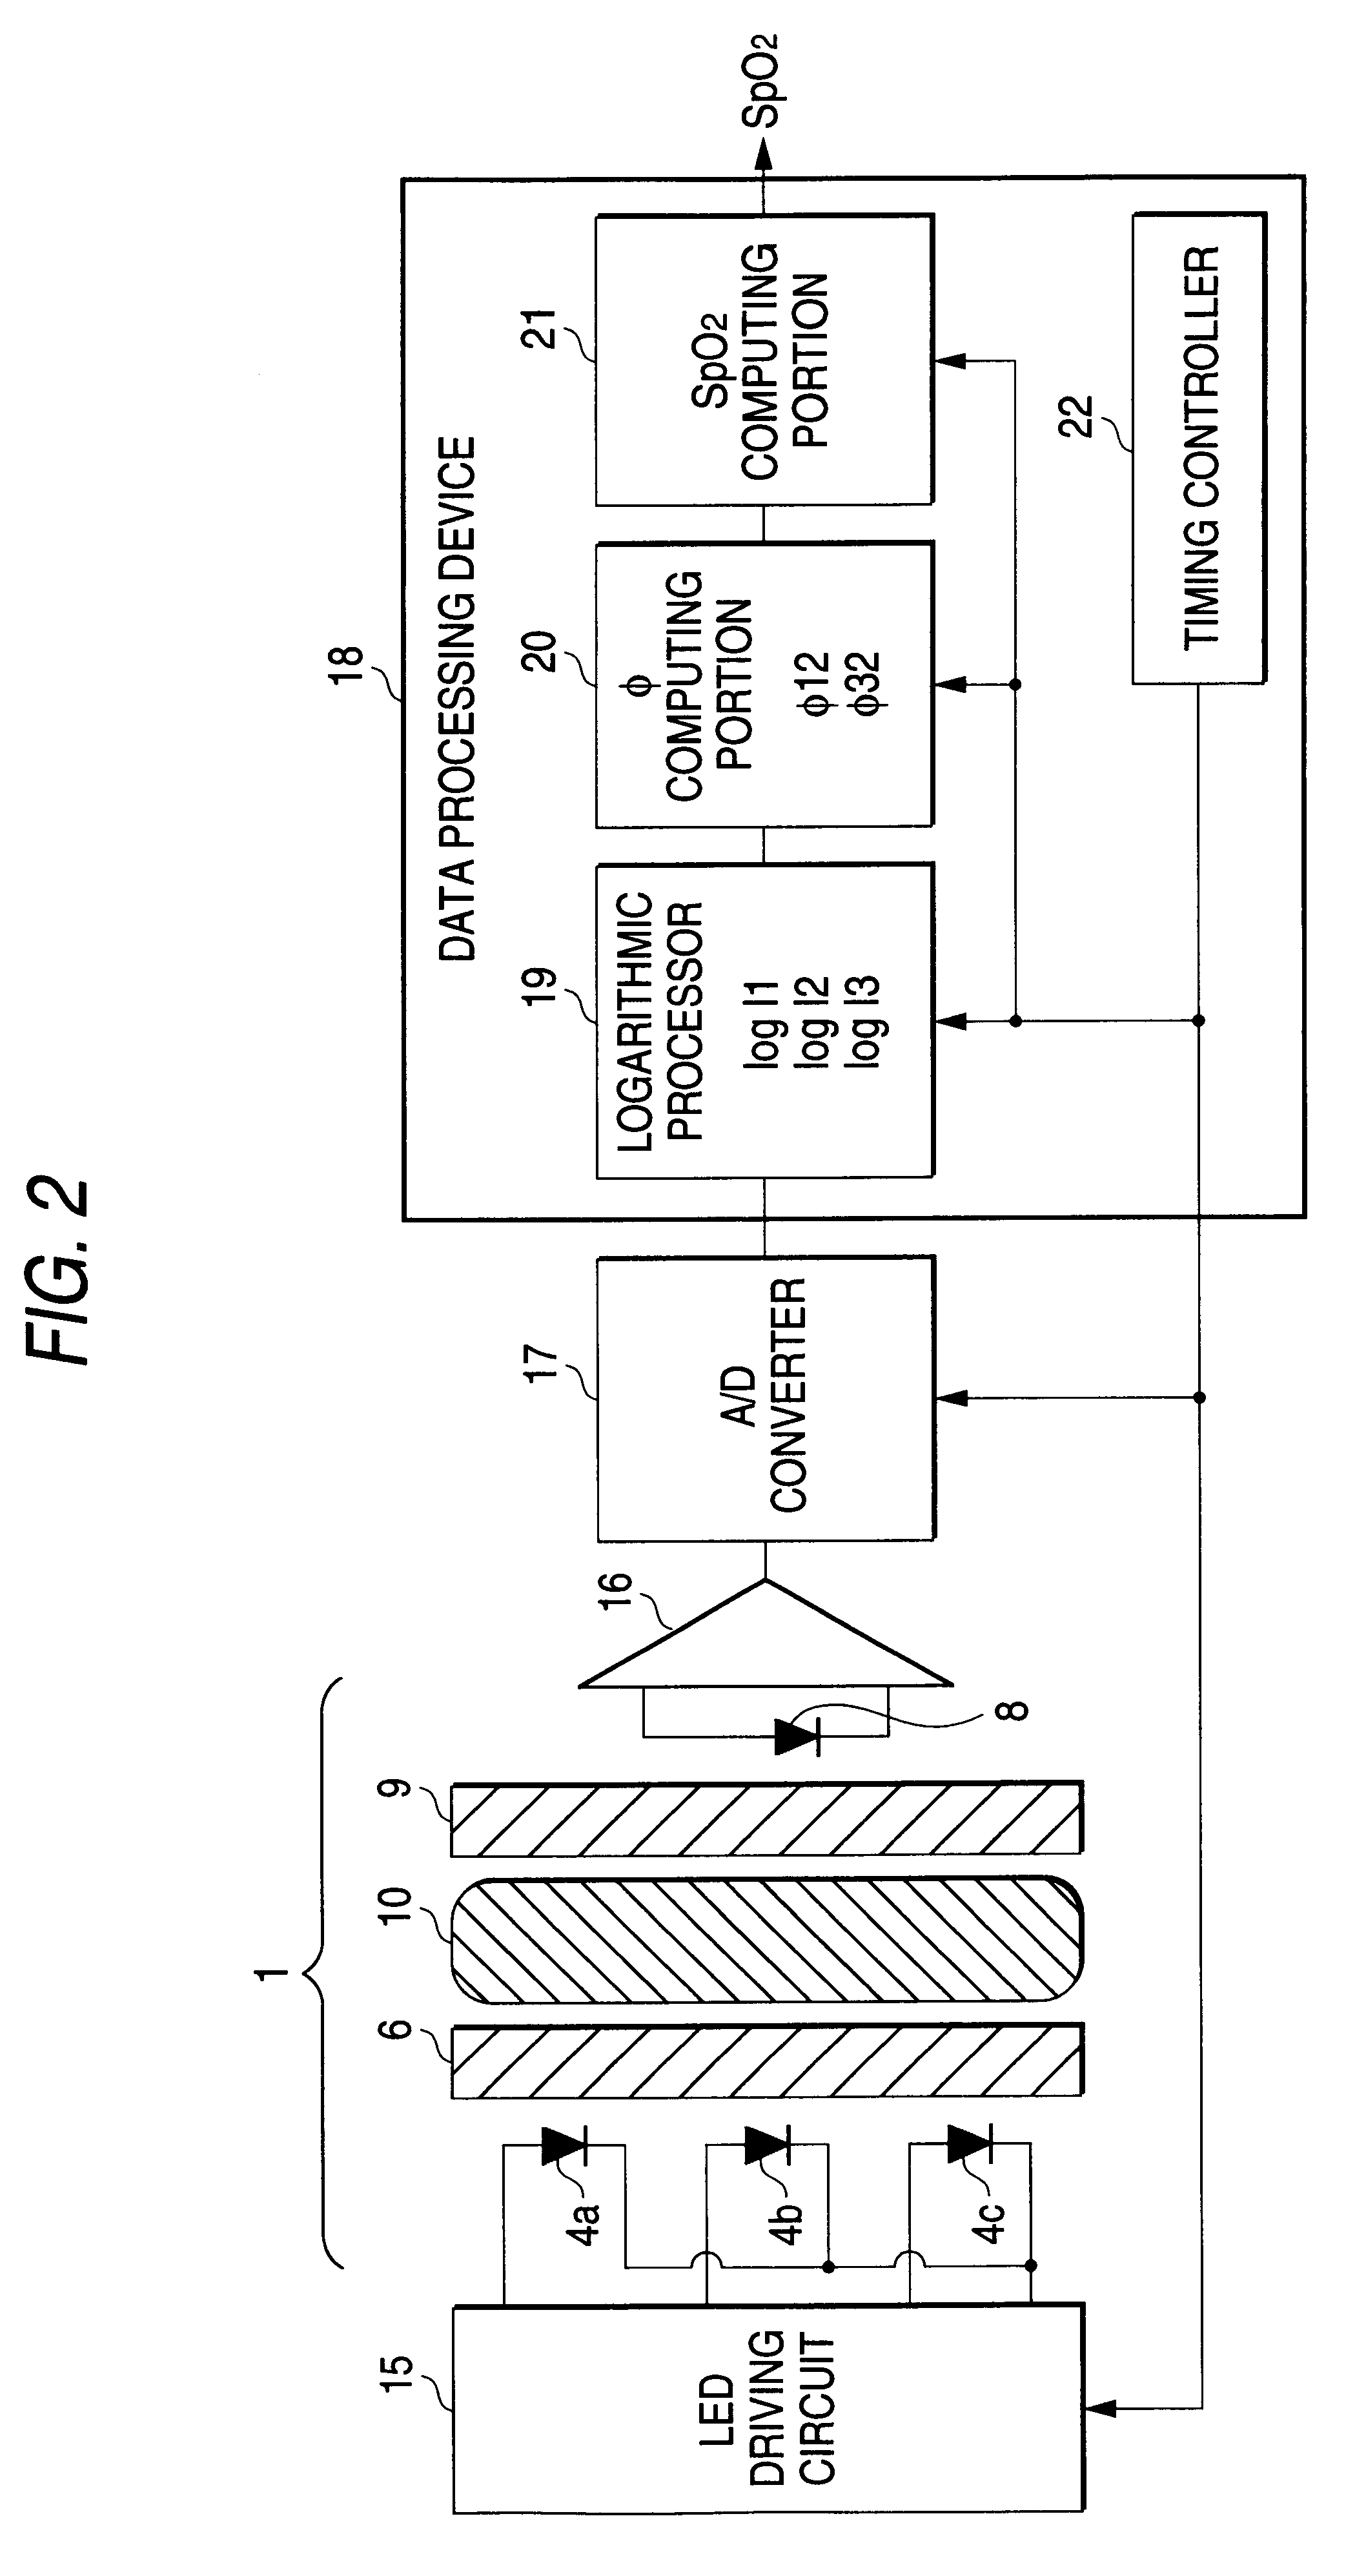 Probe and apparatus for determining concentration of light-absorbing materials in living tissue